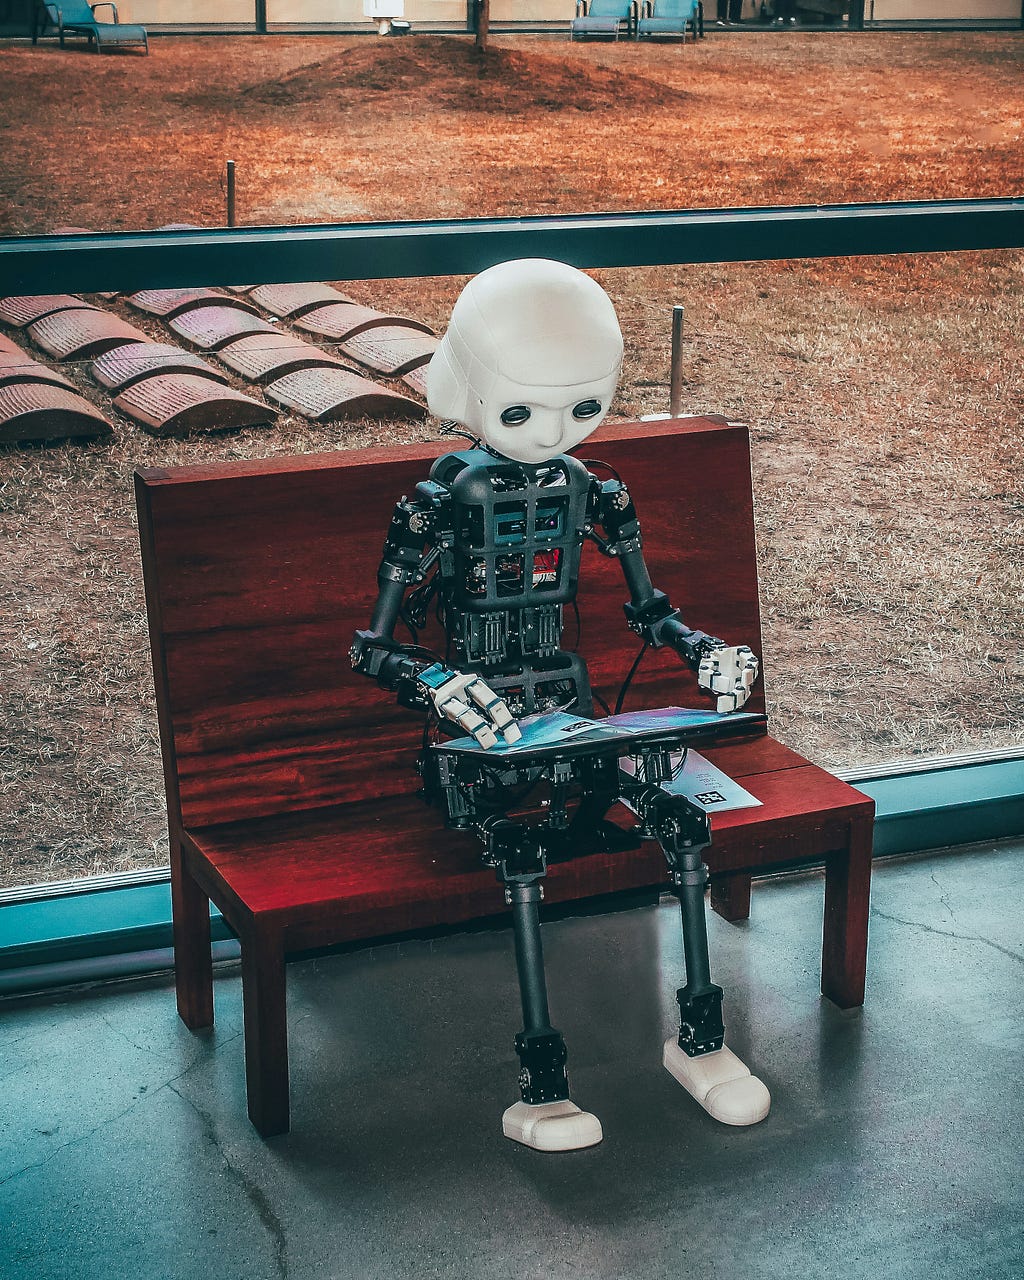 Humanoid robot sitting on a bench and typing on a computer keyboard.